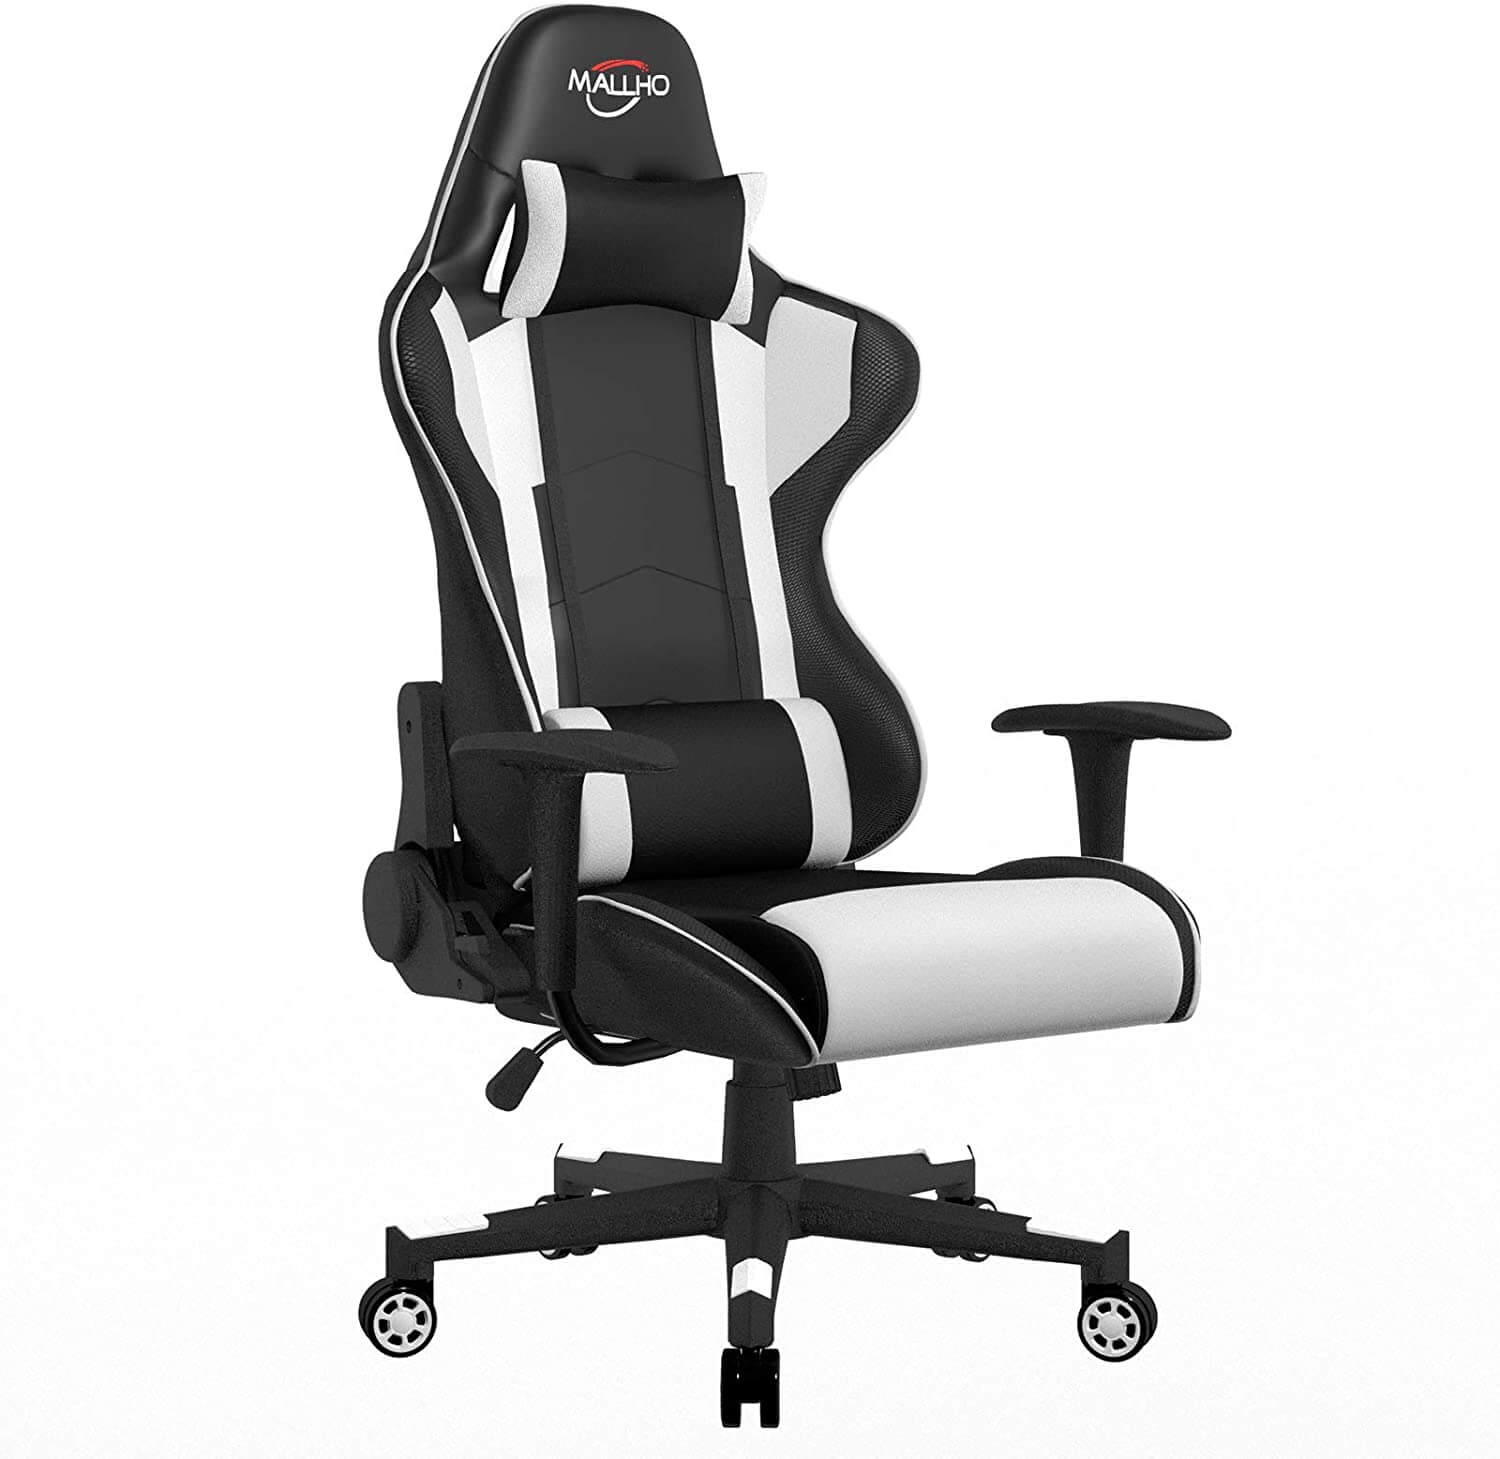 Top 12 Cheap Gaming Chairs under $100 - Top Game Stuff